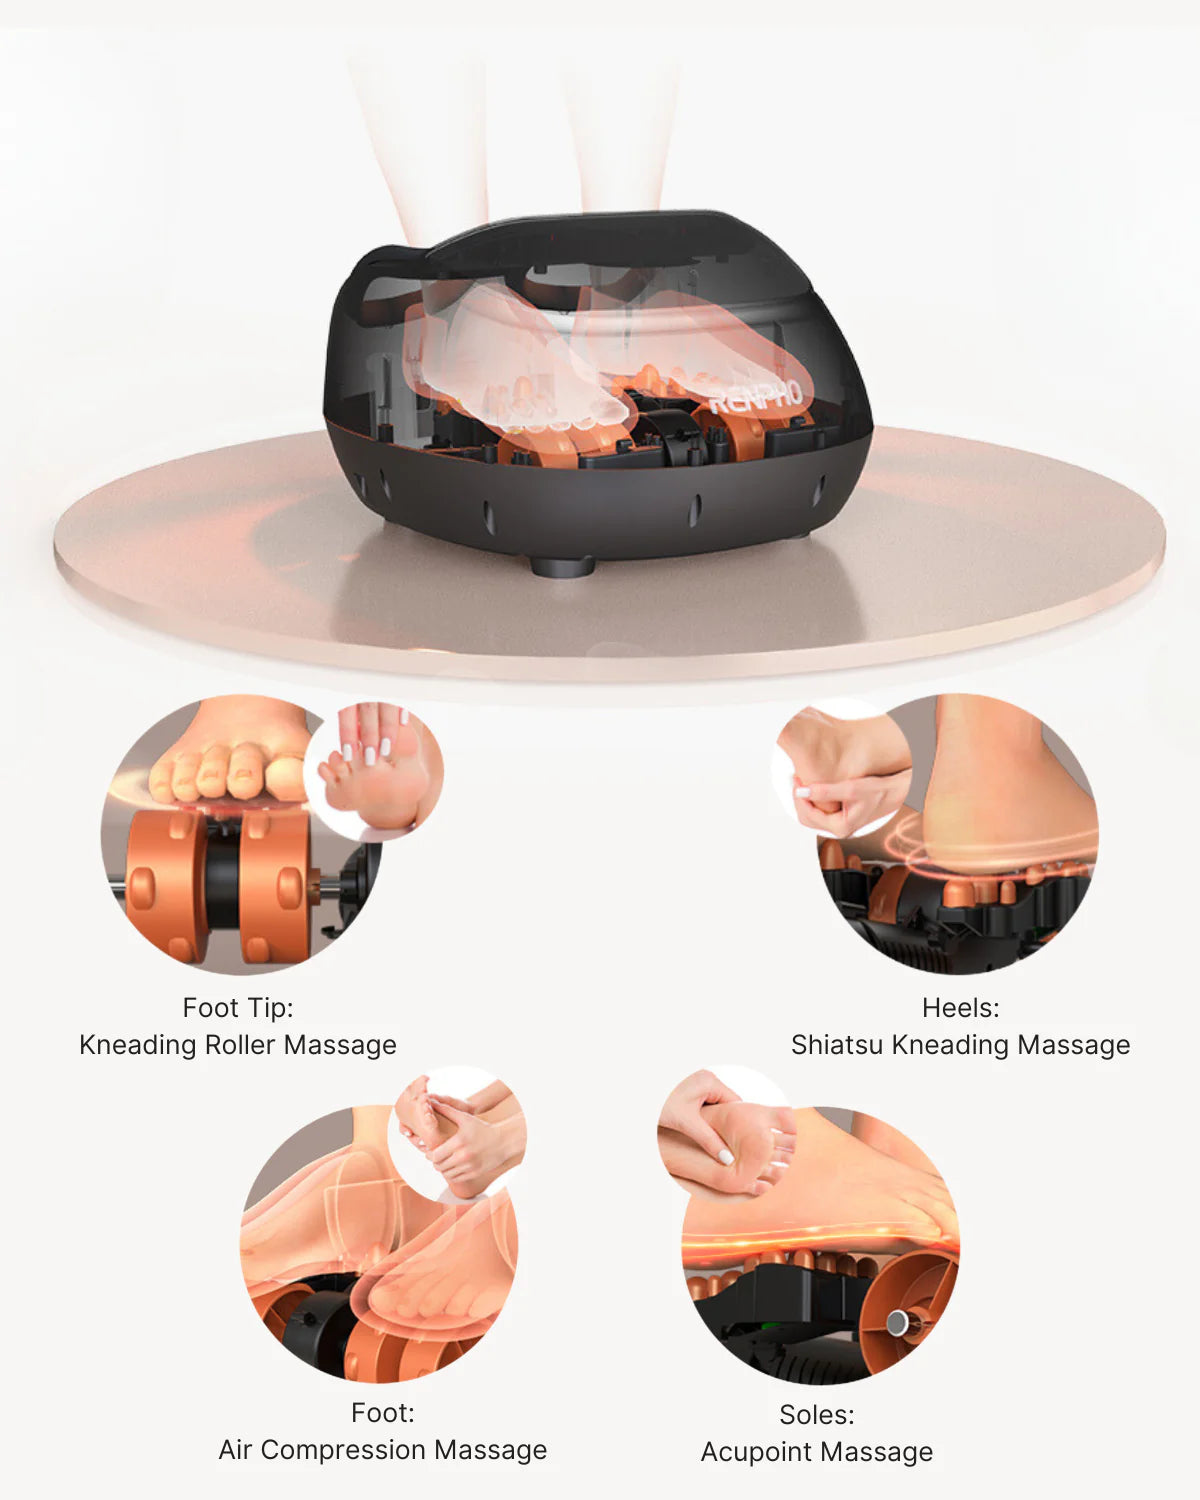 A 3d-rendered image showcasing a black Renpho EU Shiatsu Foot Massager Premium with transparent sections revealing internal mechanisms, surrounded by four smaller images depicting types of massages: kneading roller, shiatsu kne